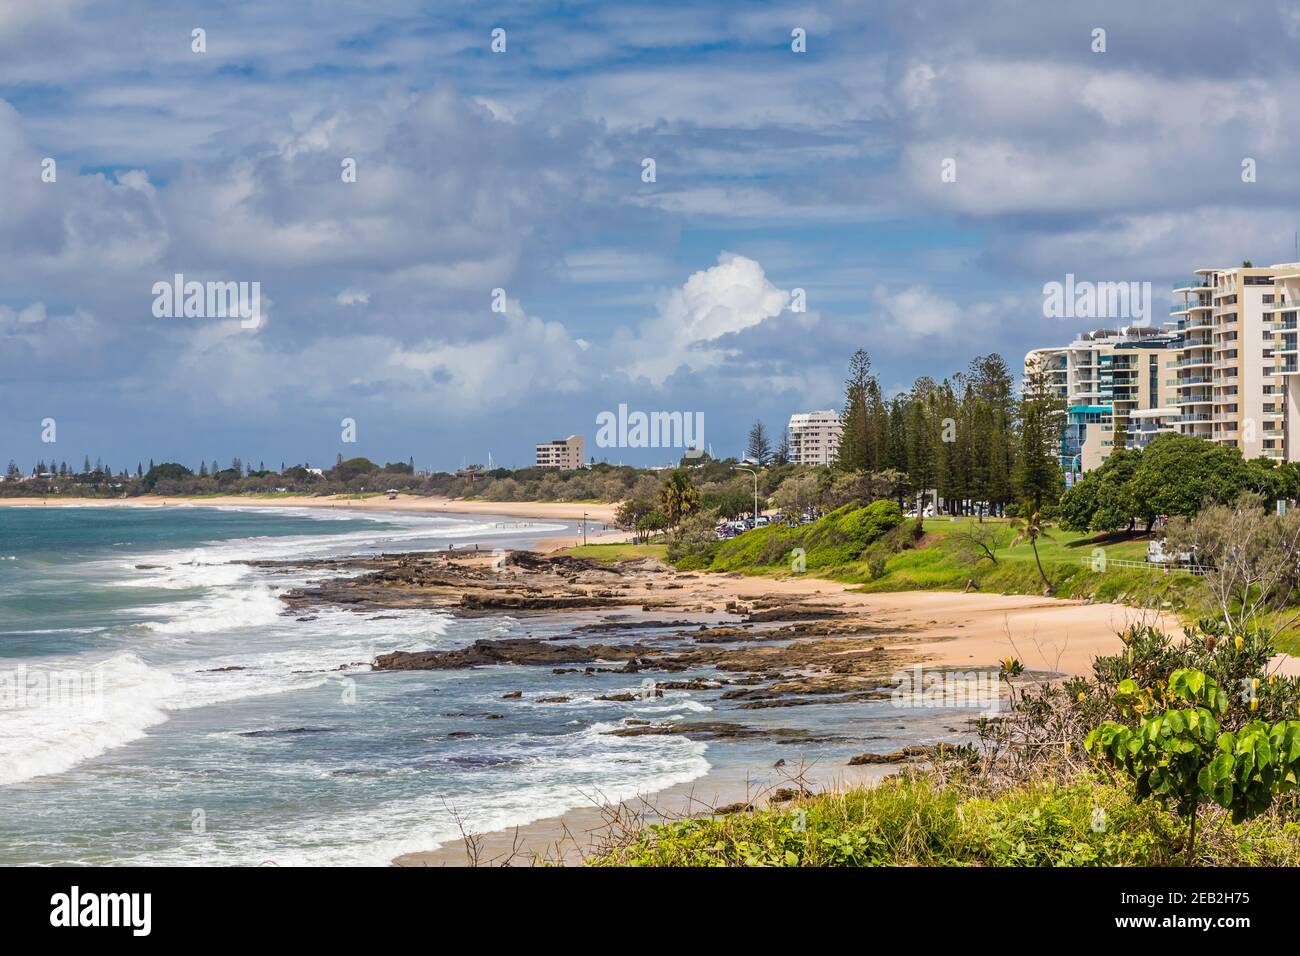 View along Mooloolaba Beach, Queensland, Australia, showing apartments surrounded with greenery, under a cloudy sky. Stock Photo